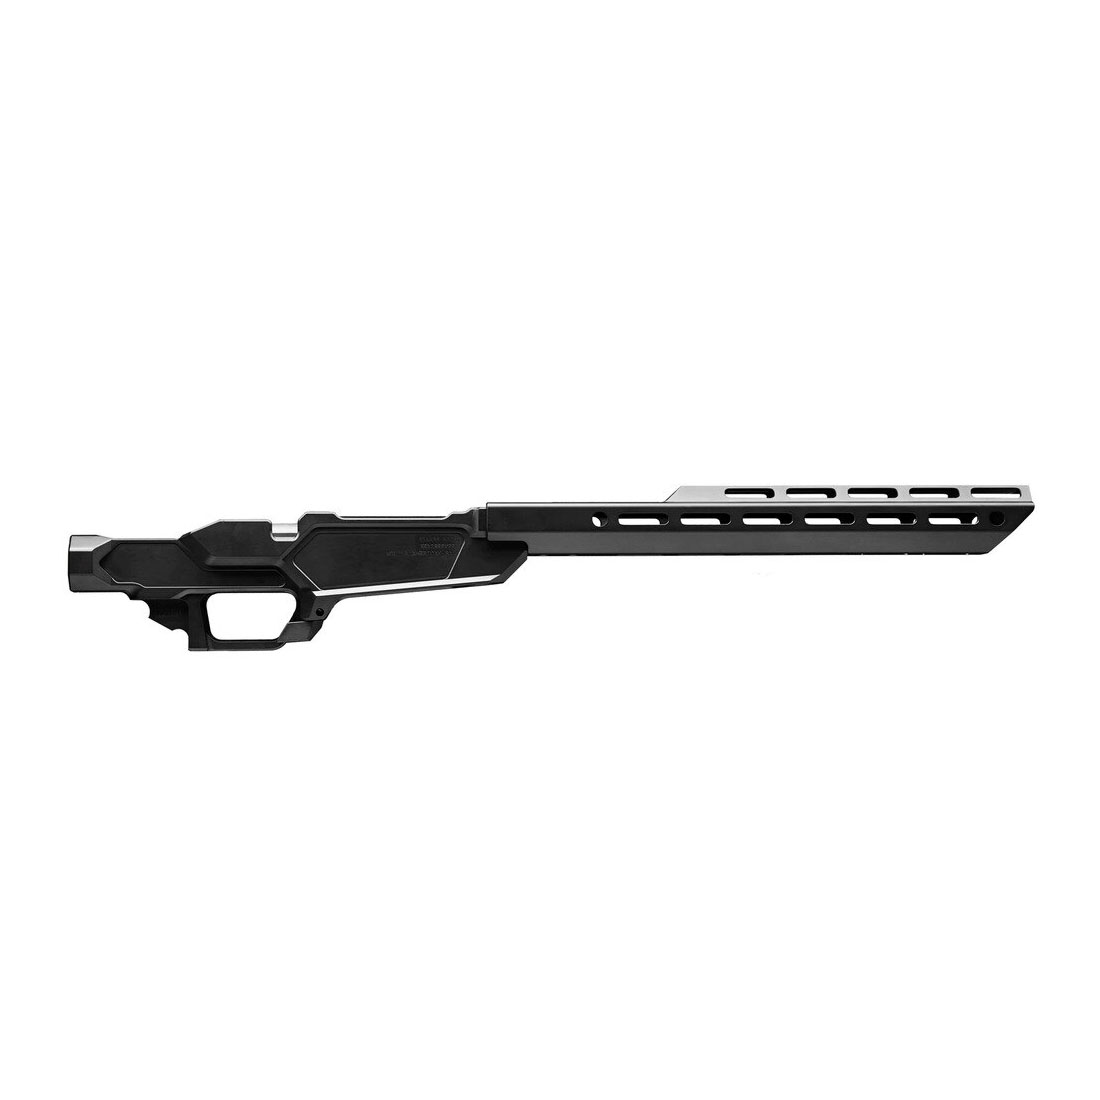 Will this fit the Ruger American ranch or do you have one that will?